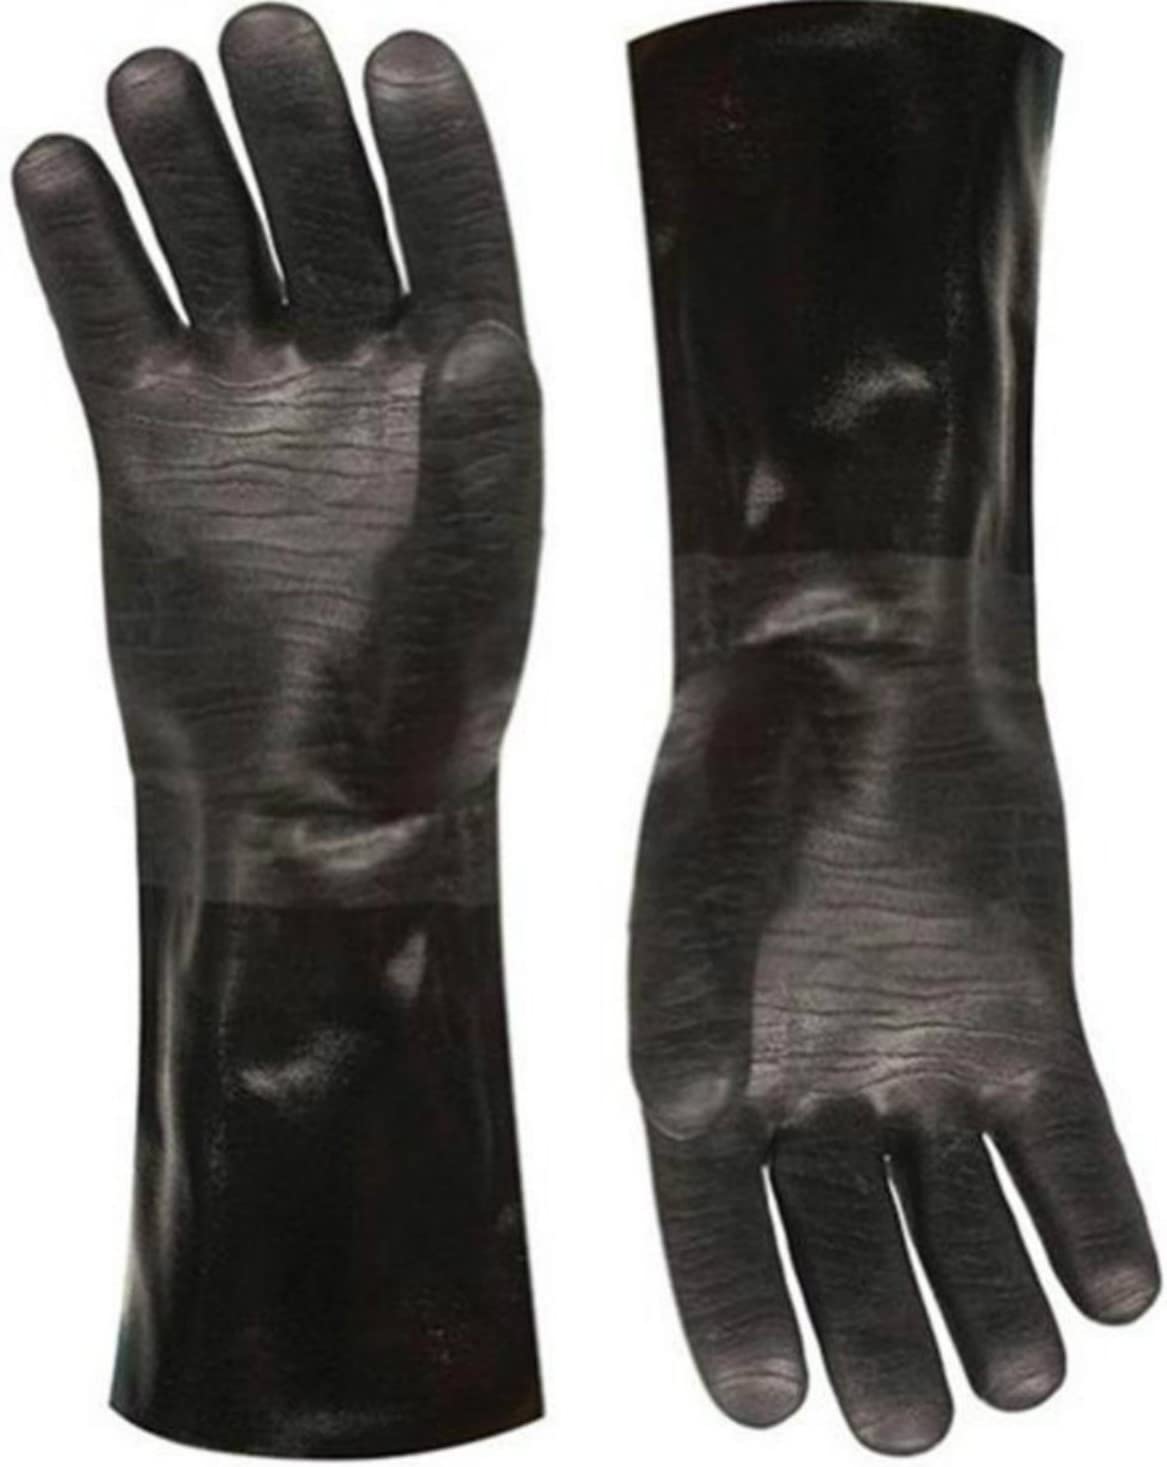 Artisan Griller Extreme Heat Resistant Kitchen Oven Cooking Gloves